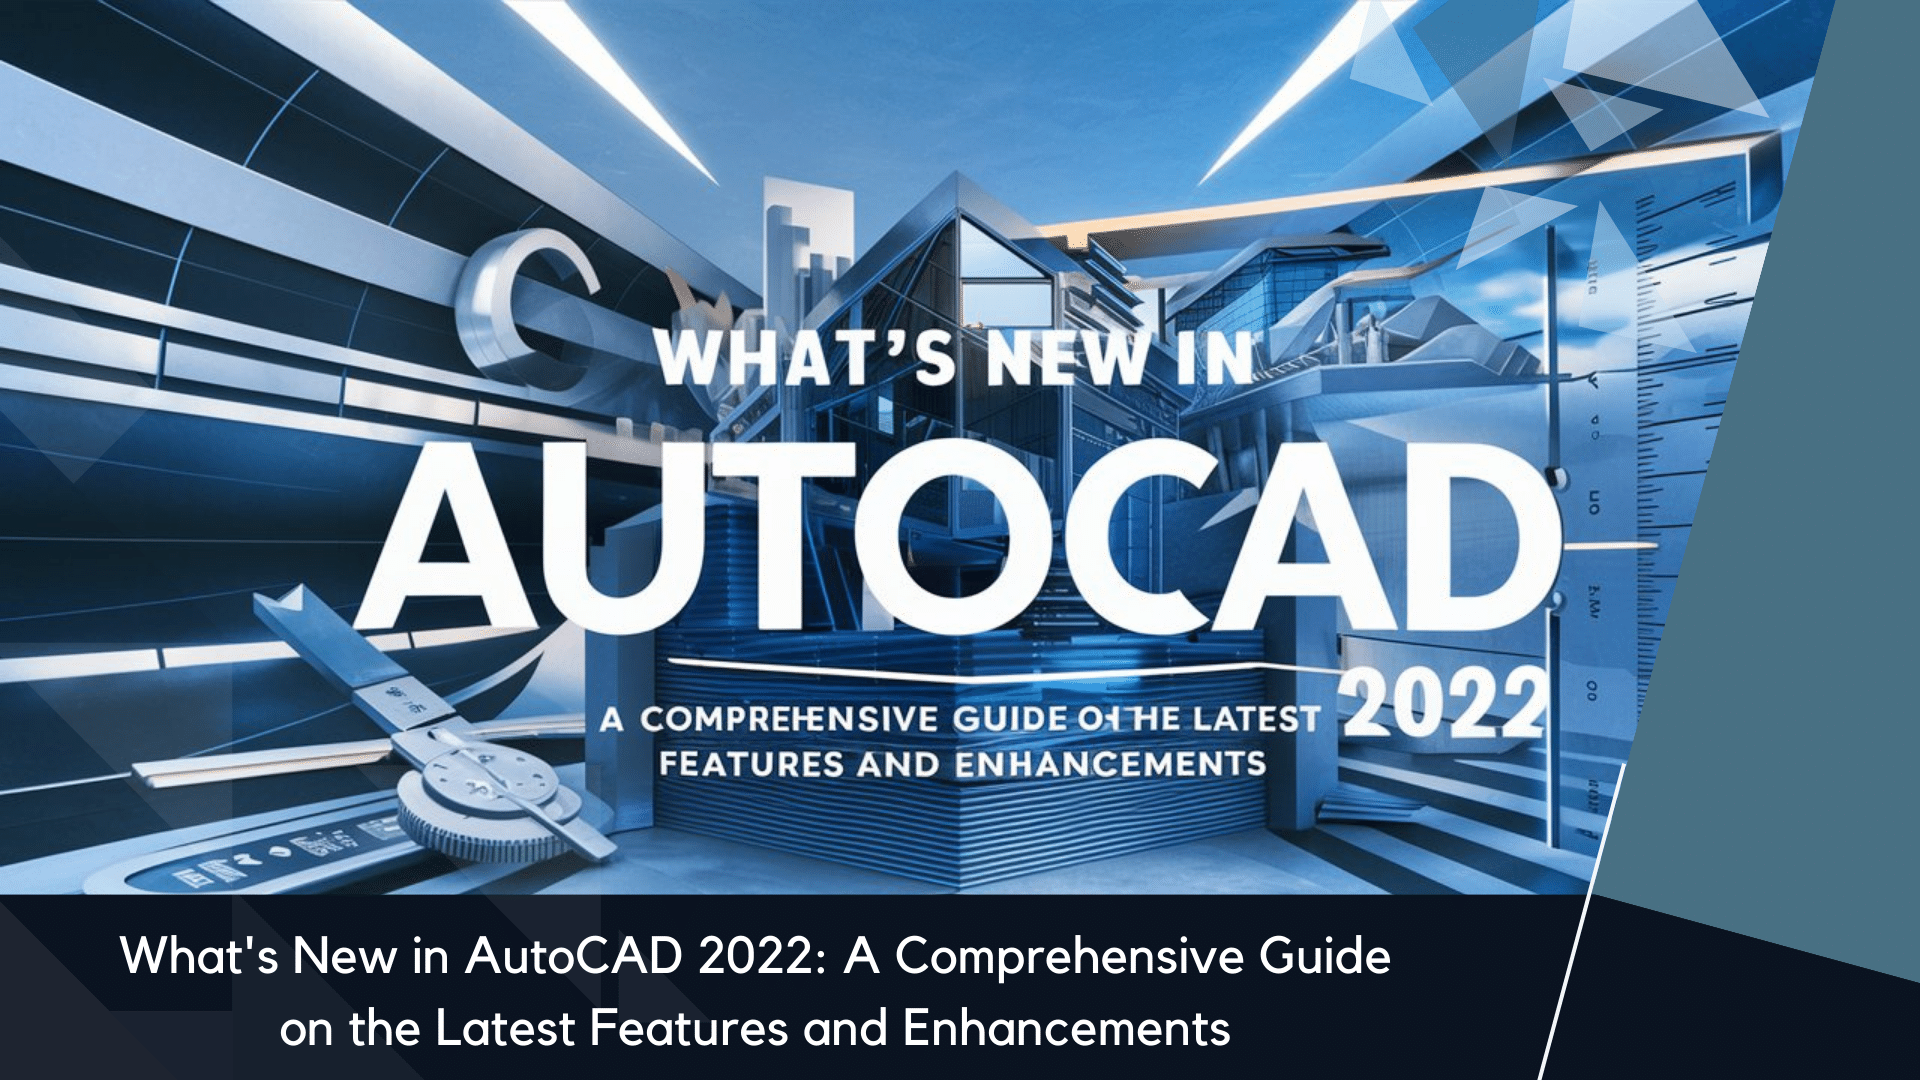 What's New in AutoCAD 2022 A Comprehensive Guide on the Latest Features and Enhancements